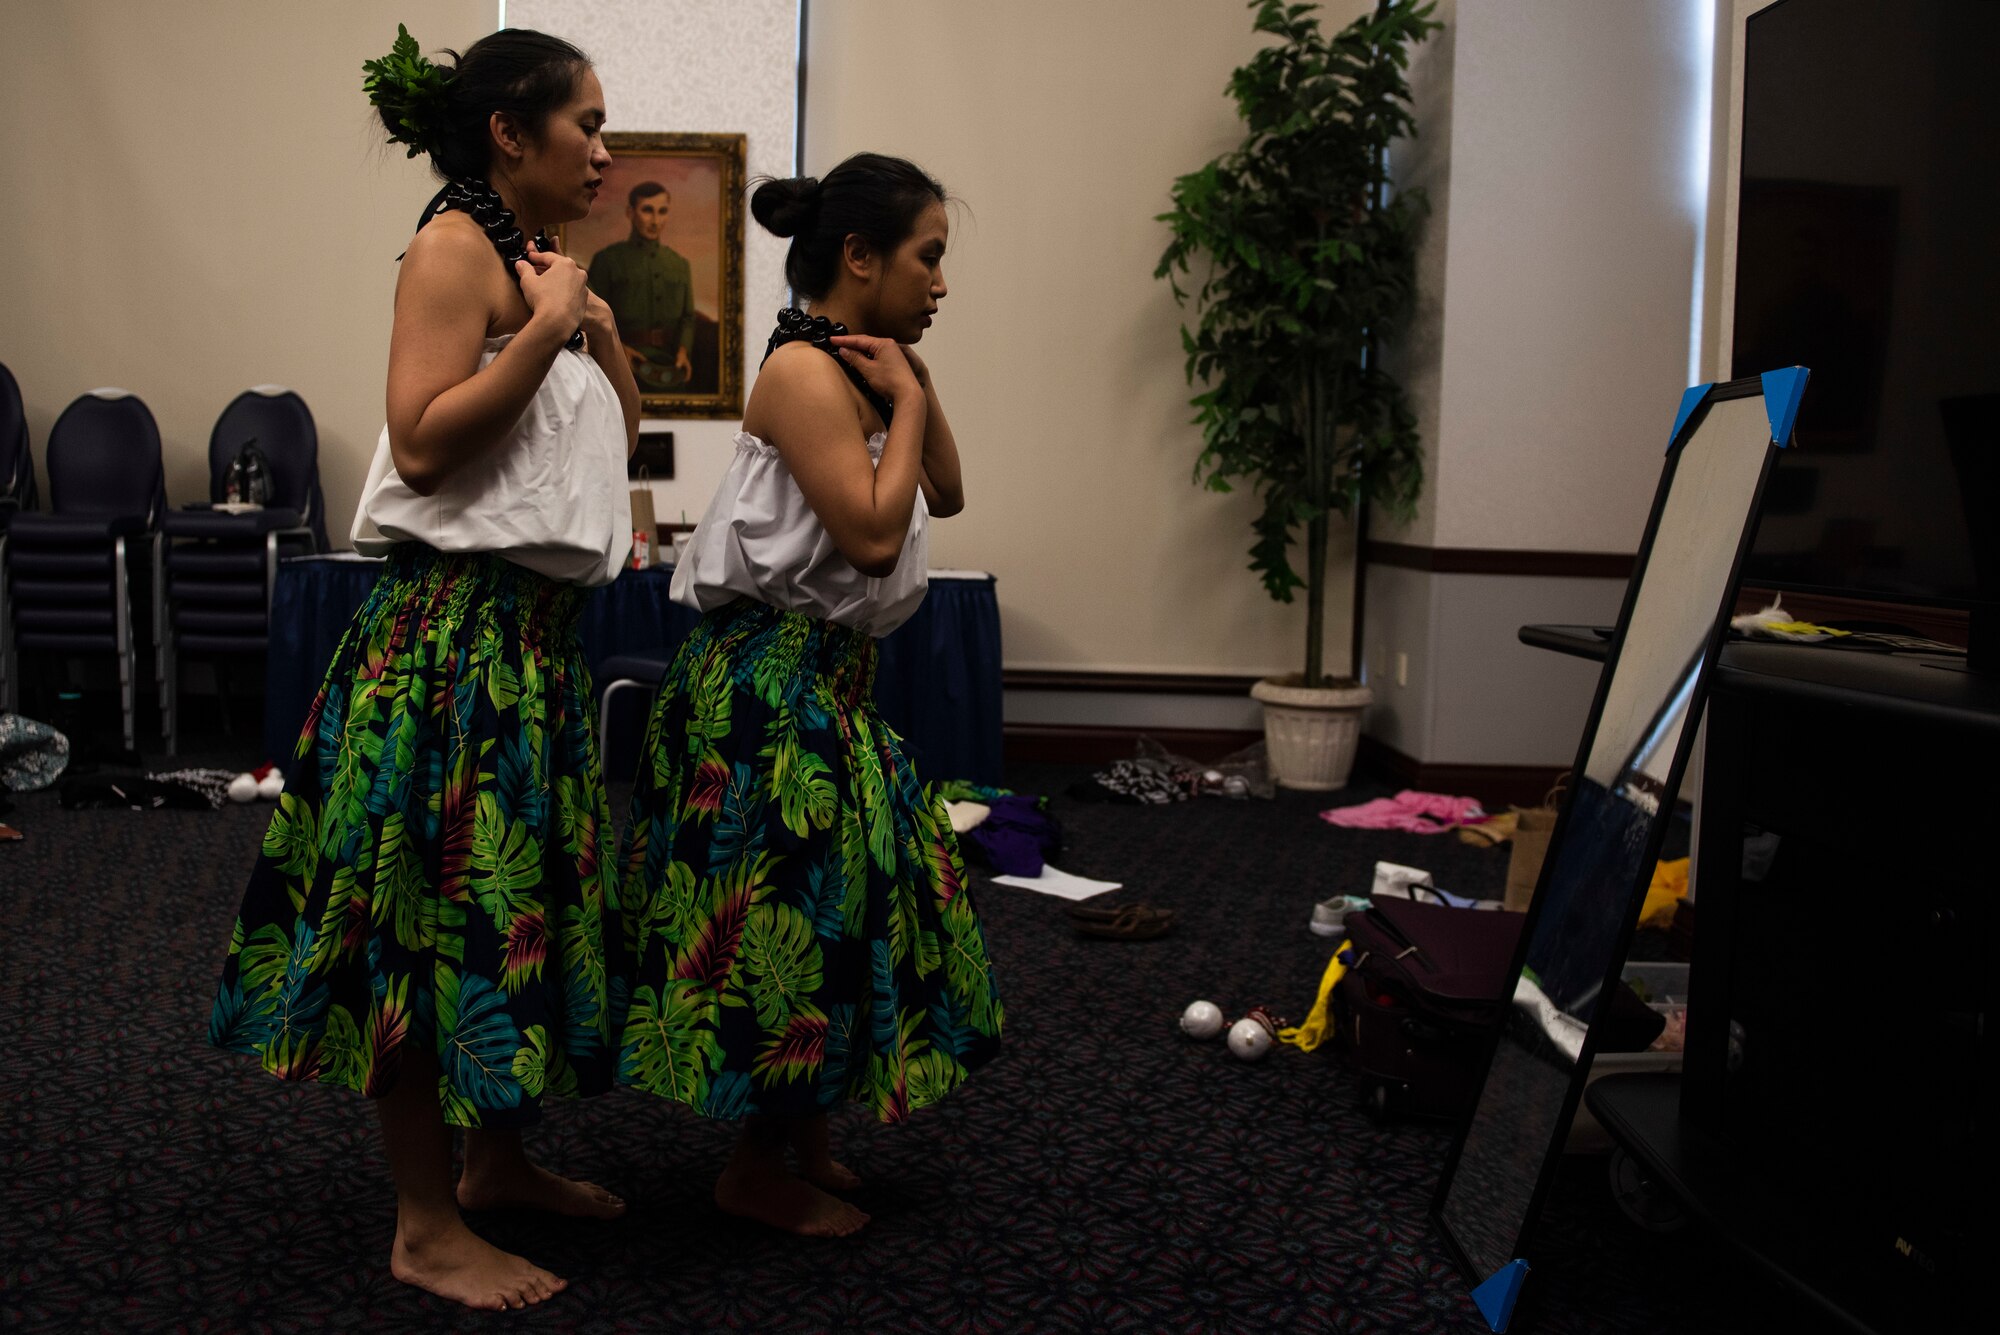 Keala Amorin and Senior Airman Tiffany Ellison, 436th Supply Chain Operations Squadron, prepare their outfits together prior to a hula performance on May 3, 2019 at Scott Air Force Base, Ill. Members of the 808 Ohana of the Midwest put on the performance as part of the Scott AFB Wingman Day Diversity Festival. (U.S. Air Force photo by Senior Airman Daniel Garcia)